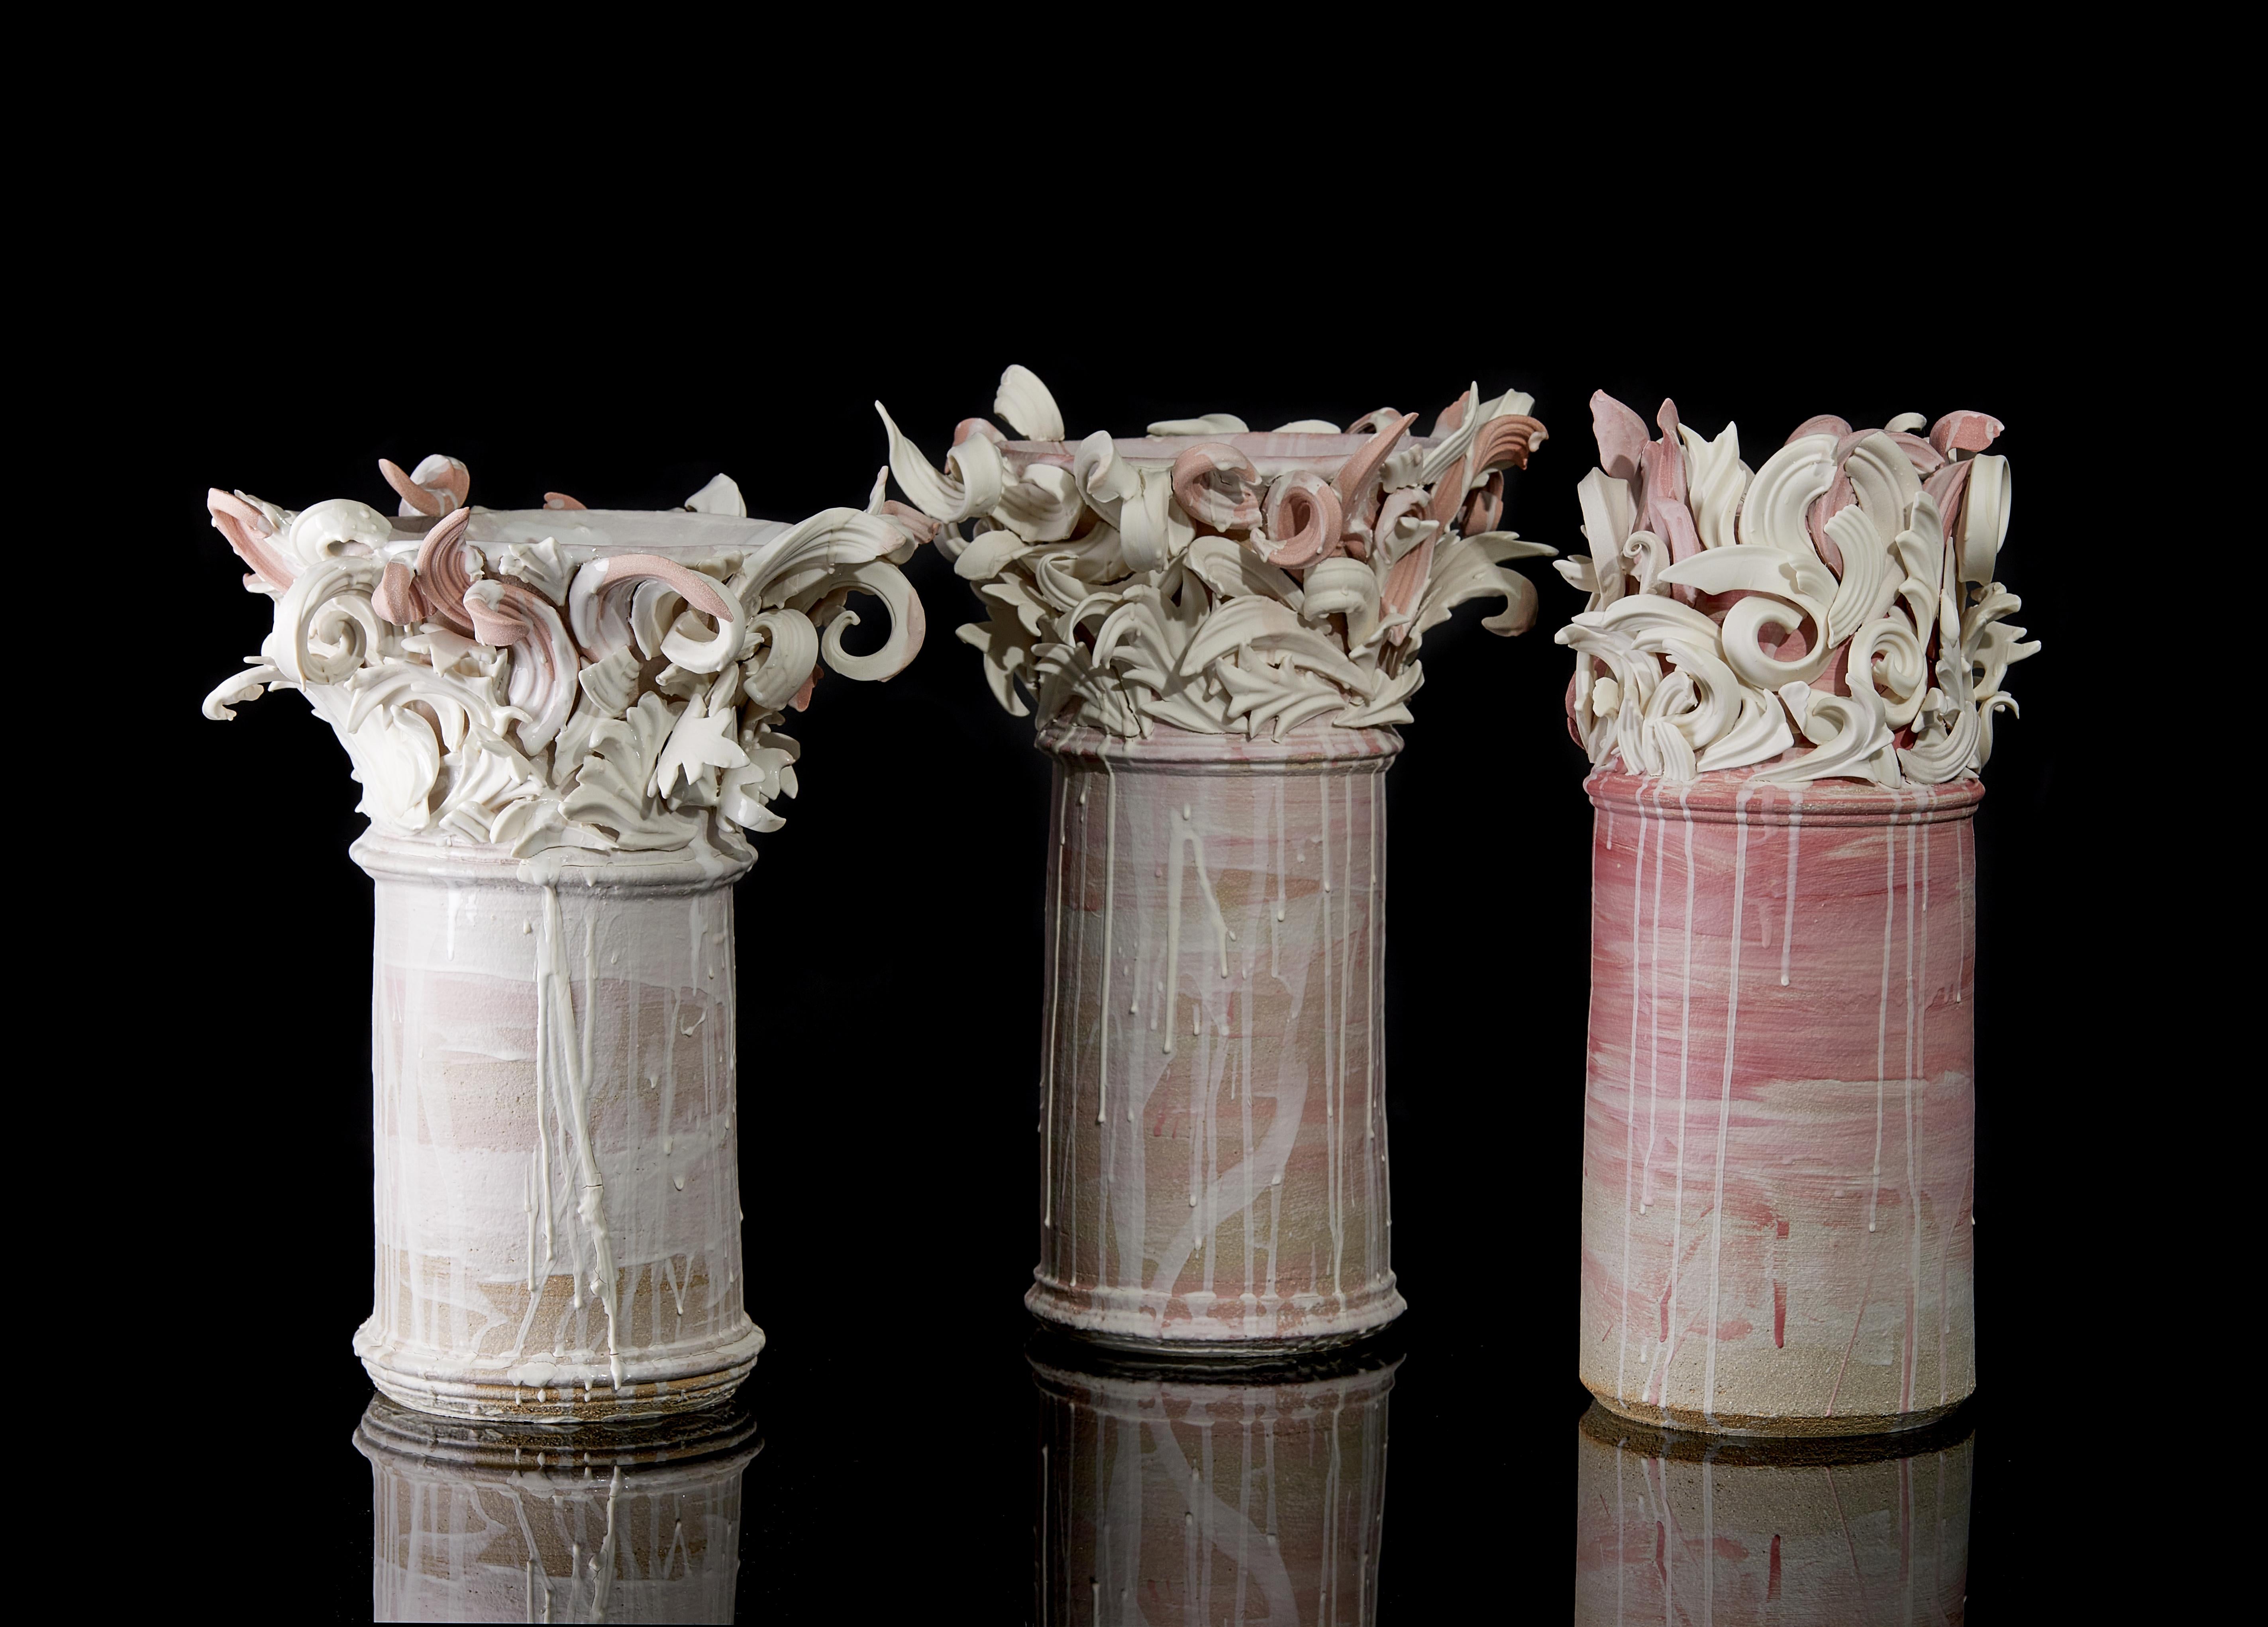 Colonnade I, a Unique Ceramic Sculptural Vase in Pink & White by Jo Taylor For Sale 11